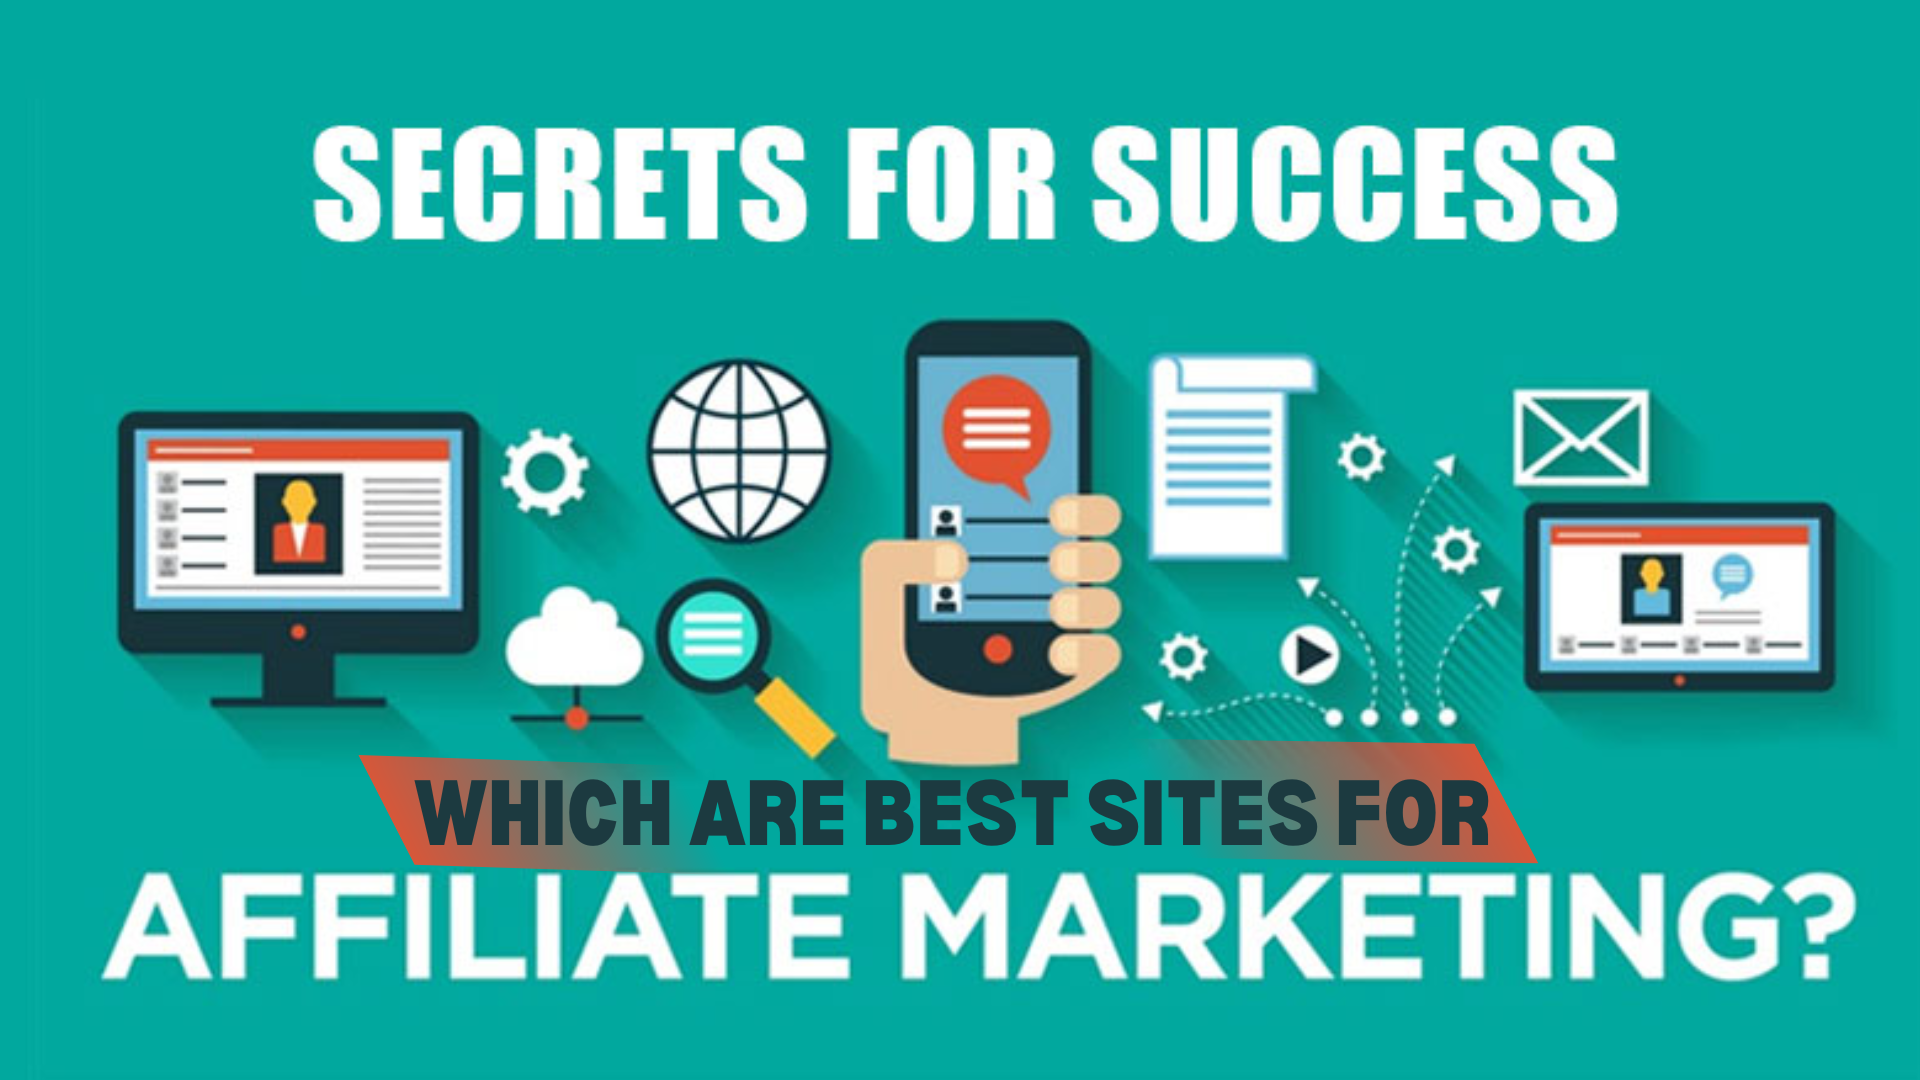 Let’s Explore How Affiliate Marketing Work and Best Sites for Affiliate Marketing